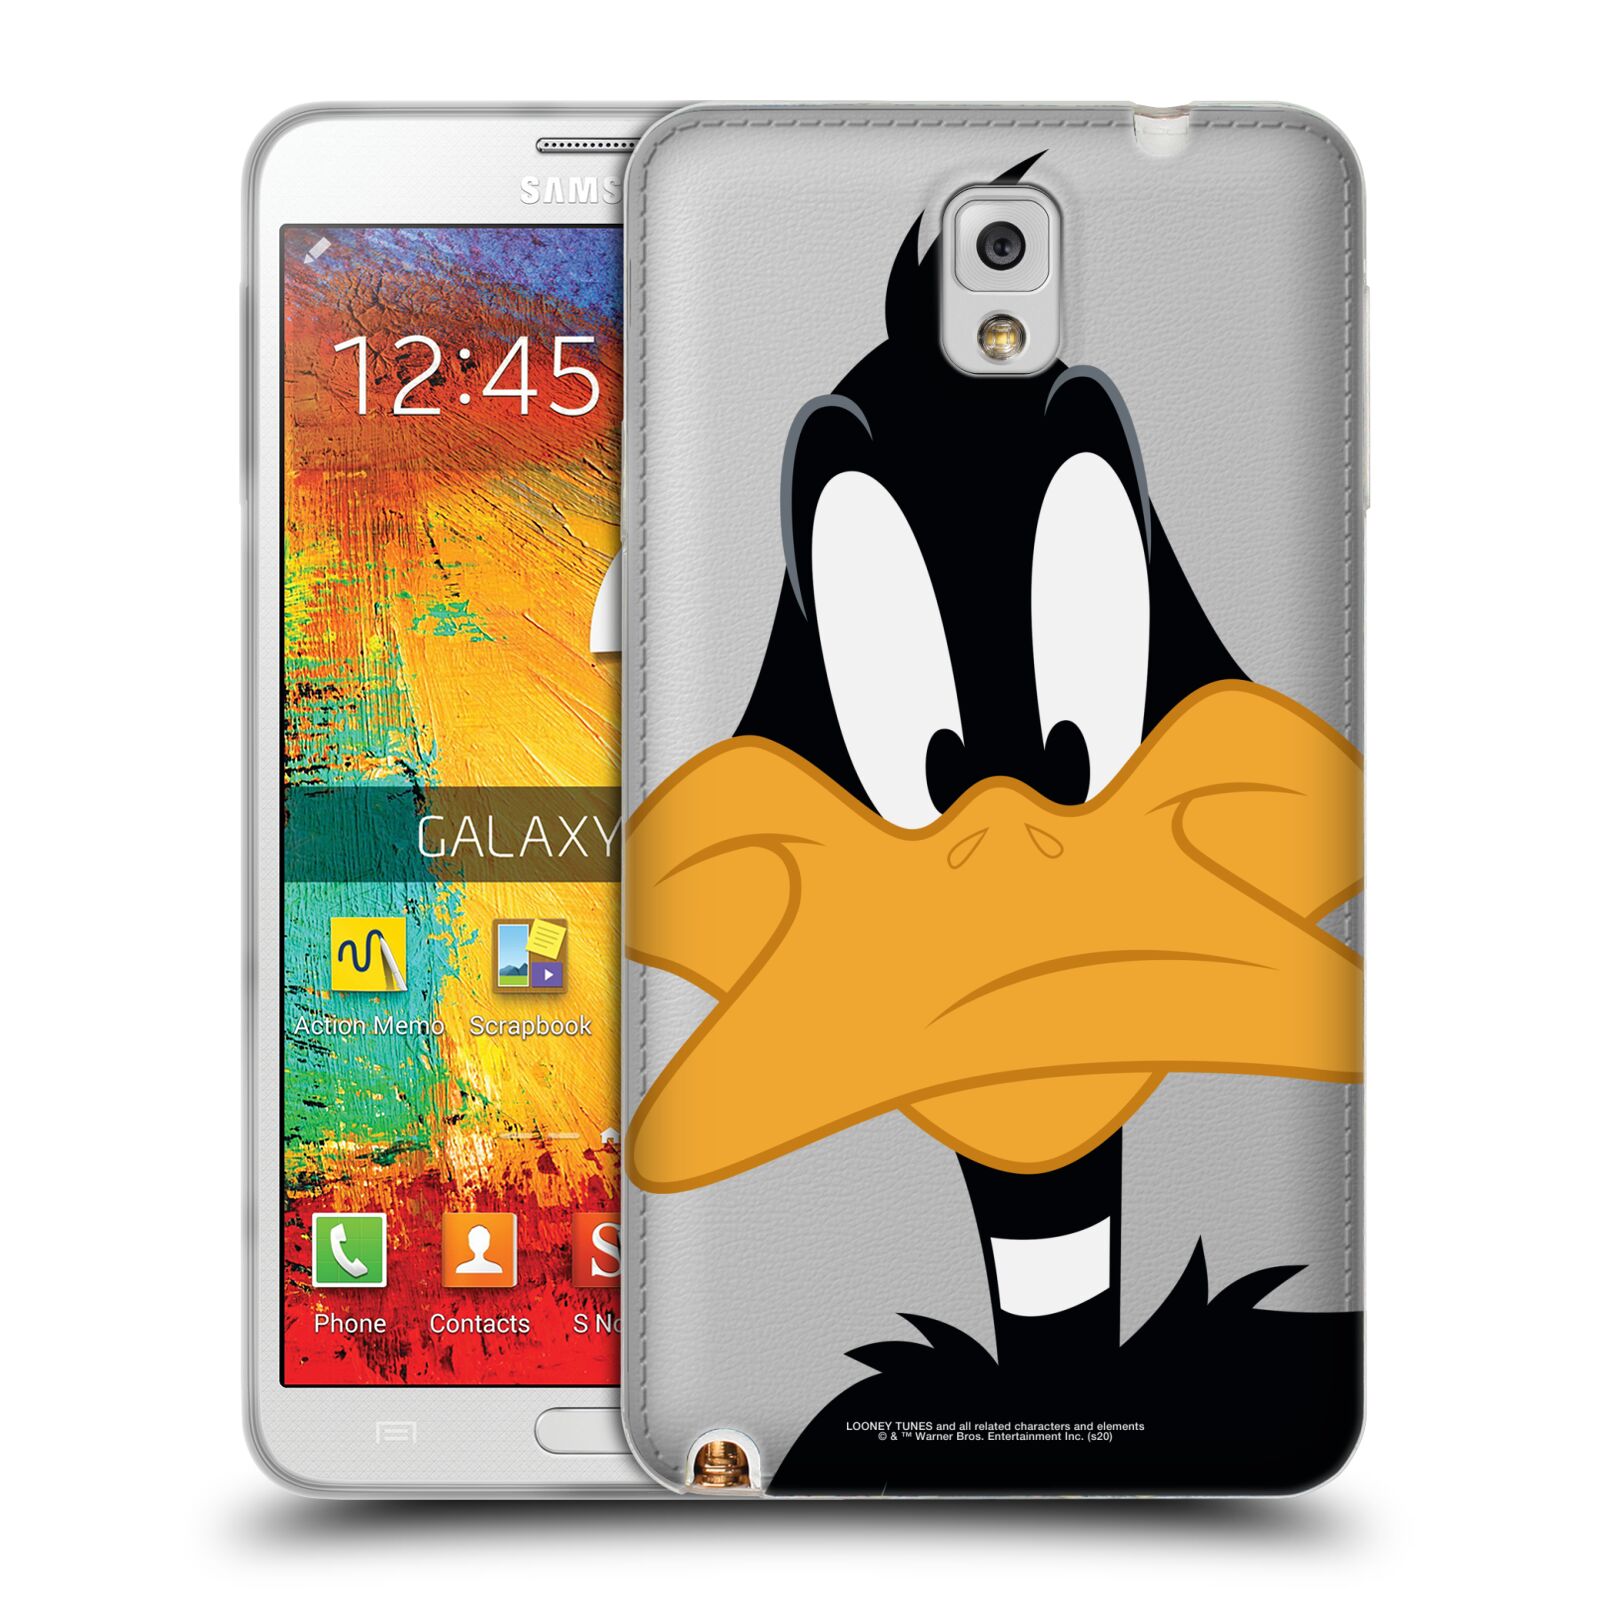 Steer Visiting grandparents automaton OFFICIAL LOONEY TUNES PERSONAJES SOFT GEL CASE FOR SAMSUNG PHONES 2 | eBay